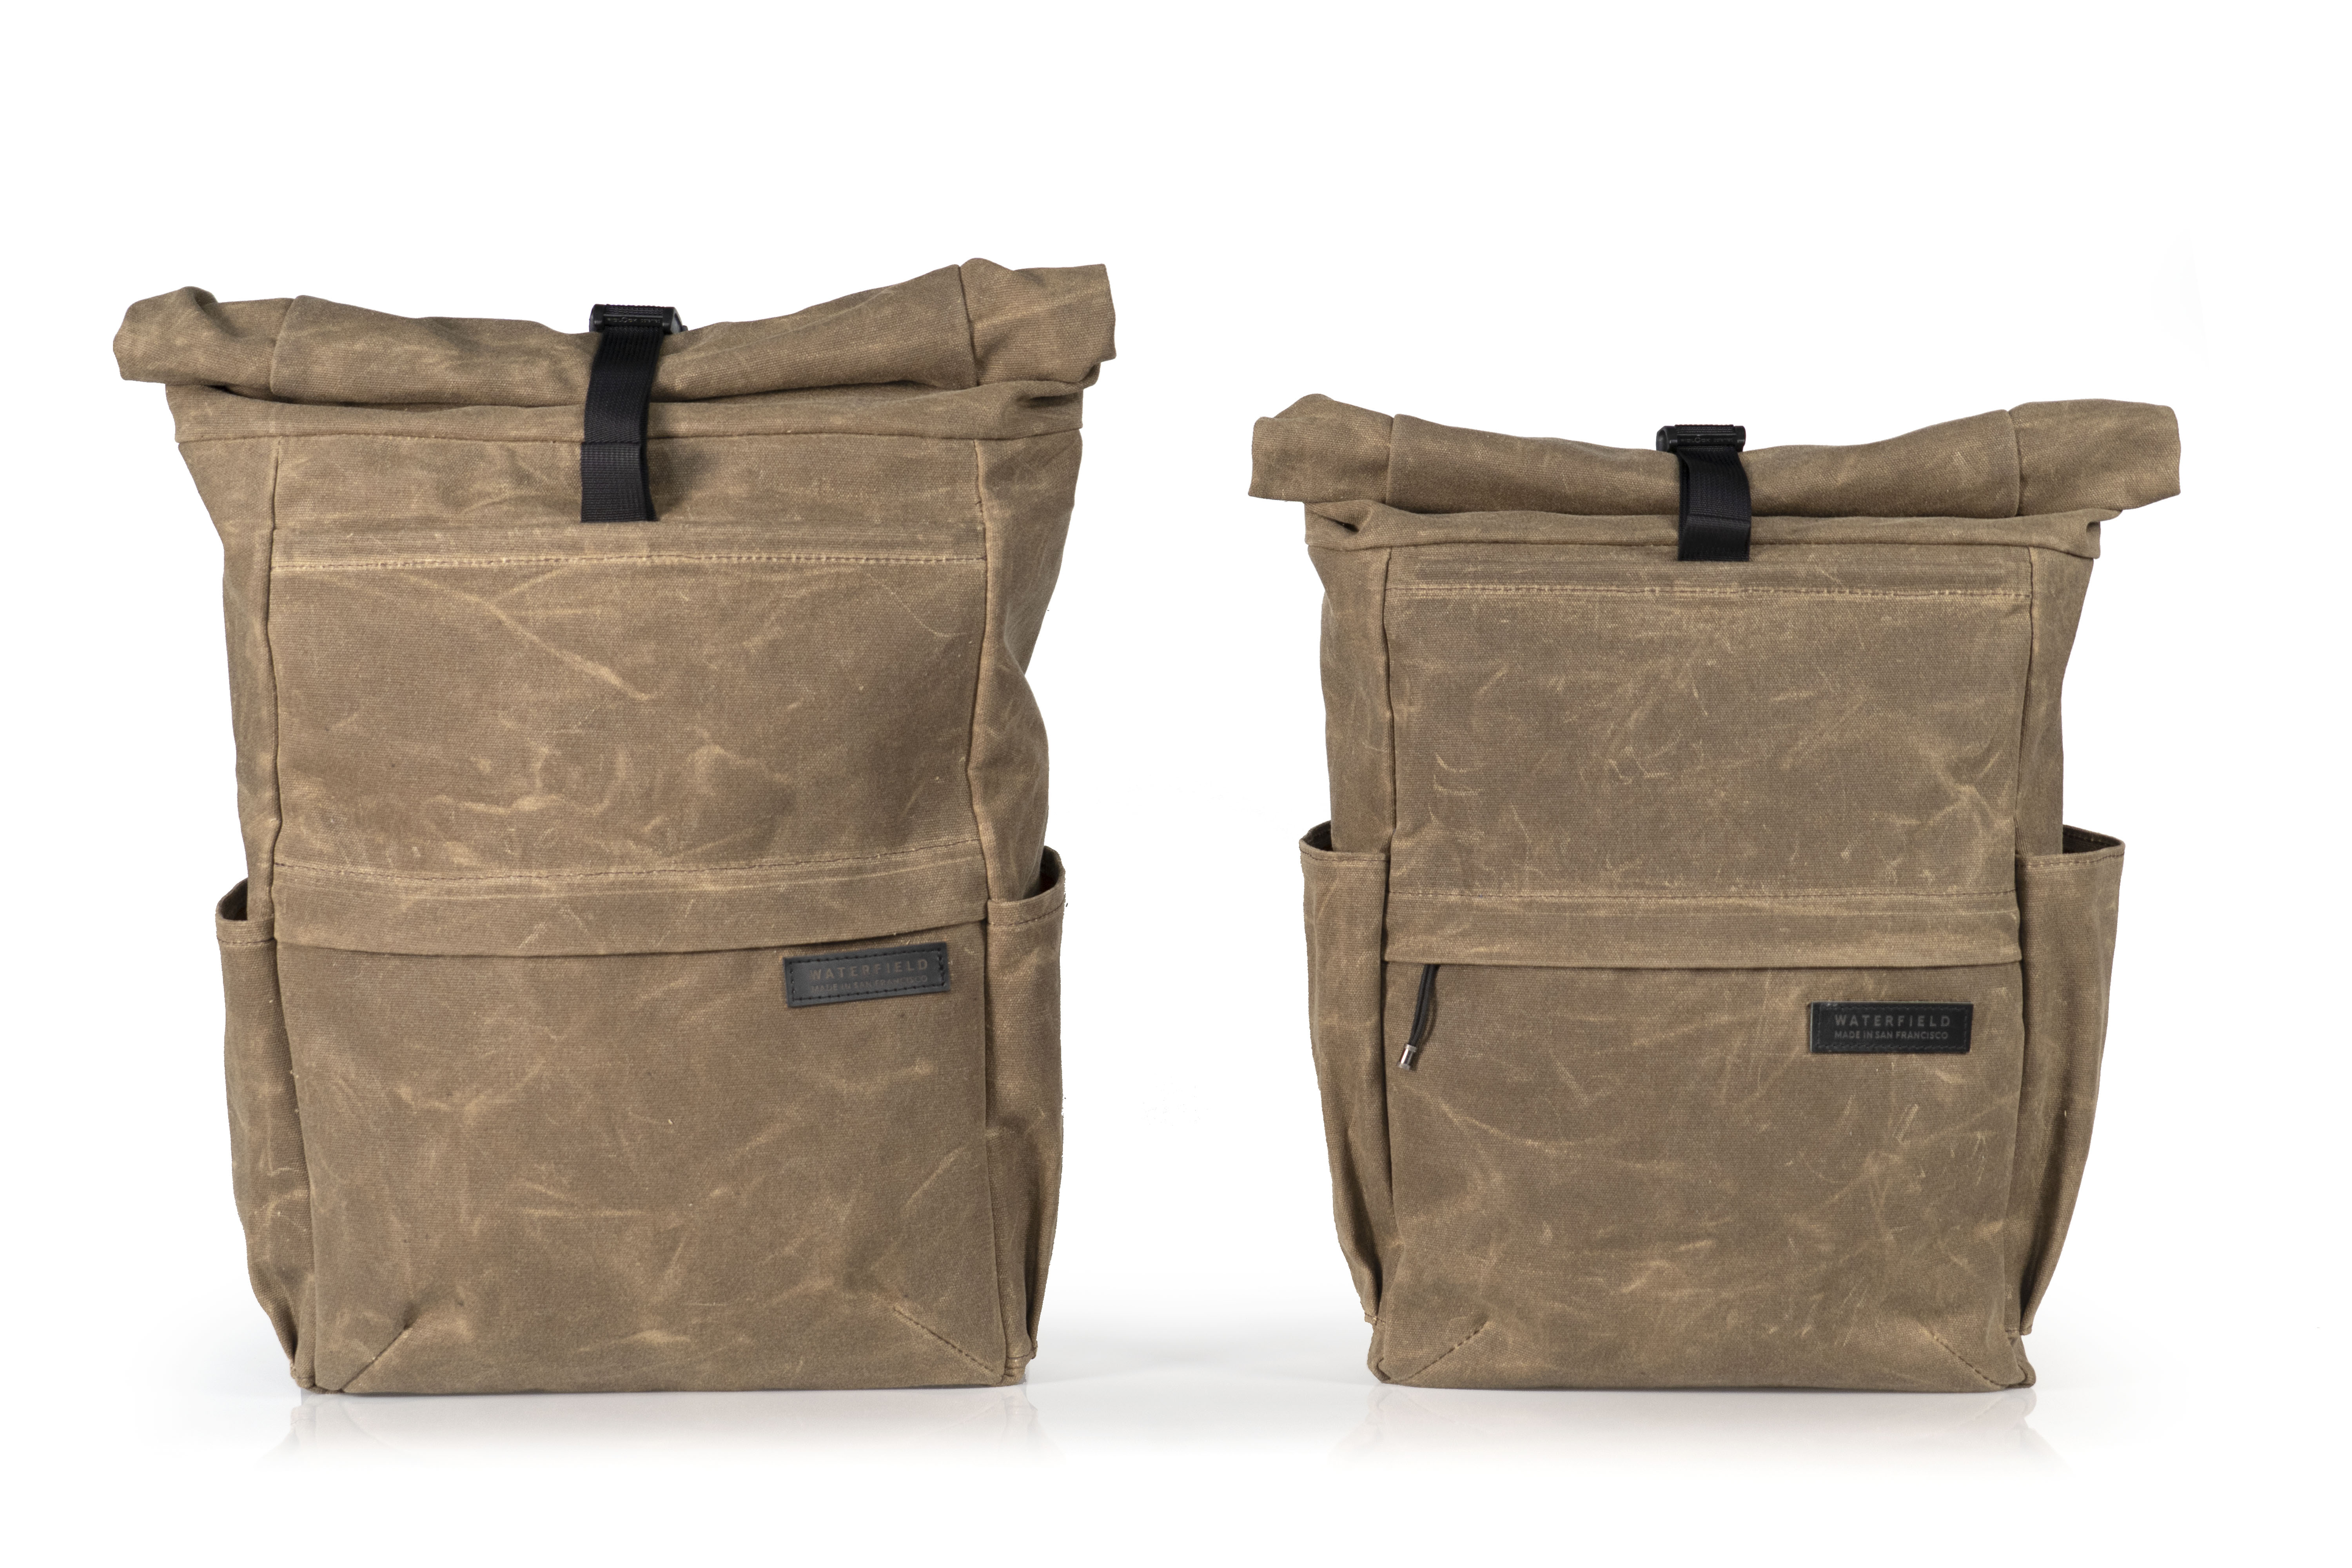 WaterField's new canvas MacBook bag is available now